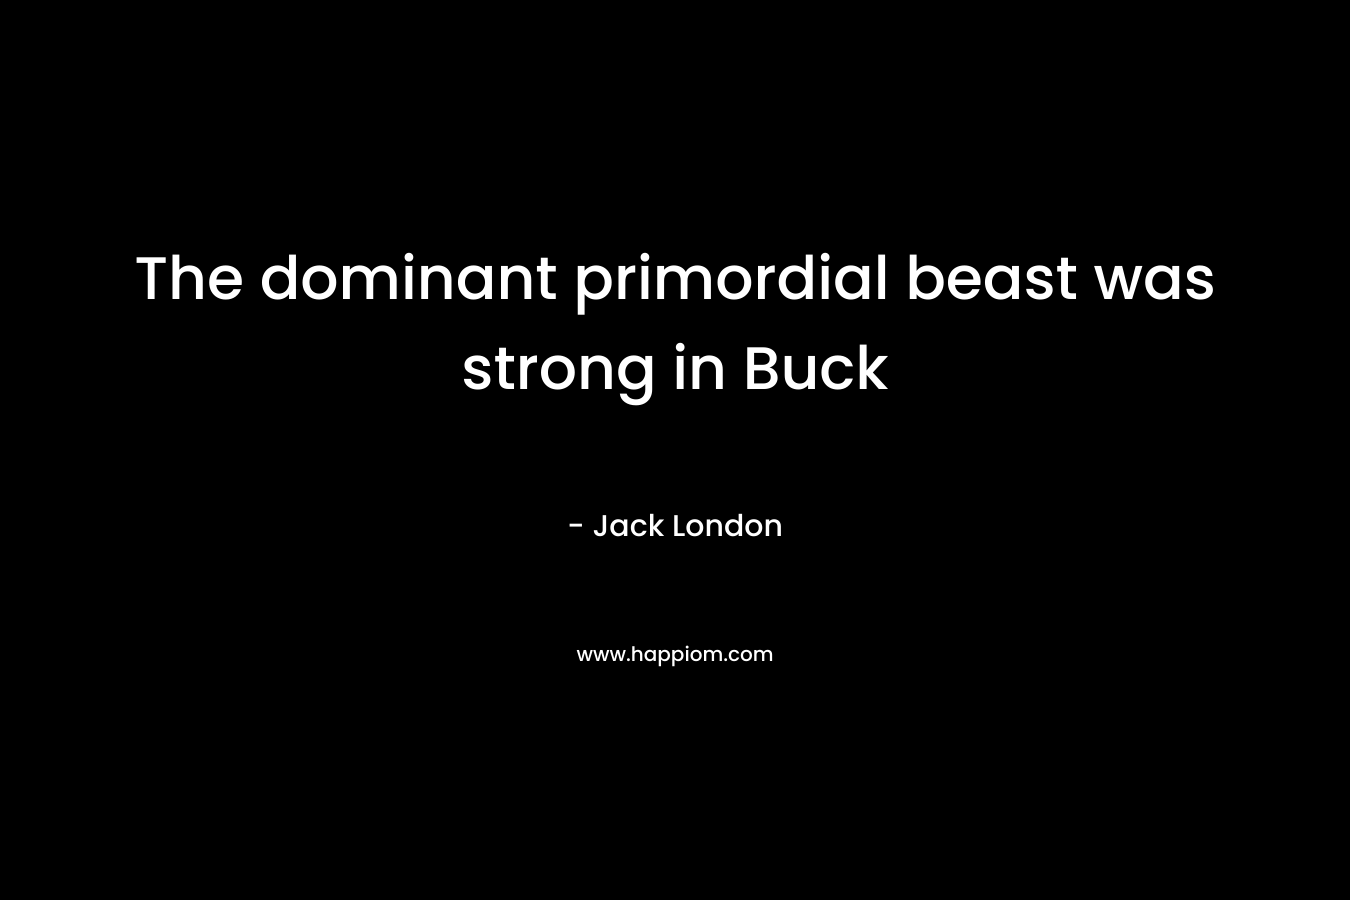 The dominant primordial beast was strong in Buck